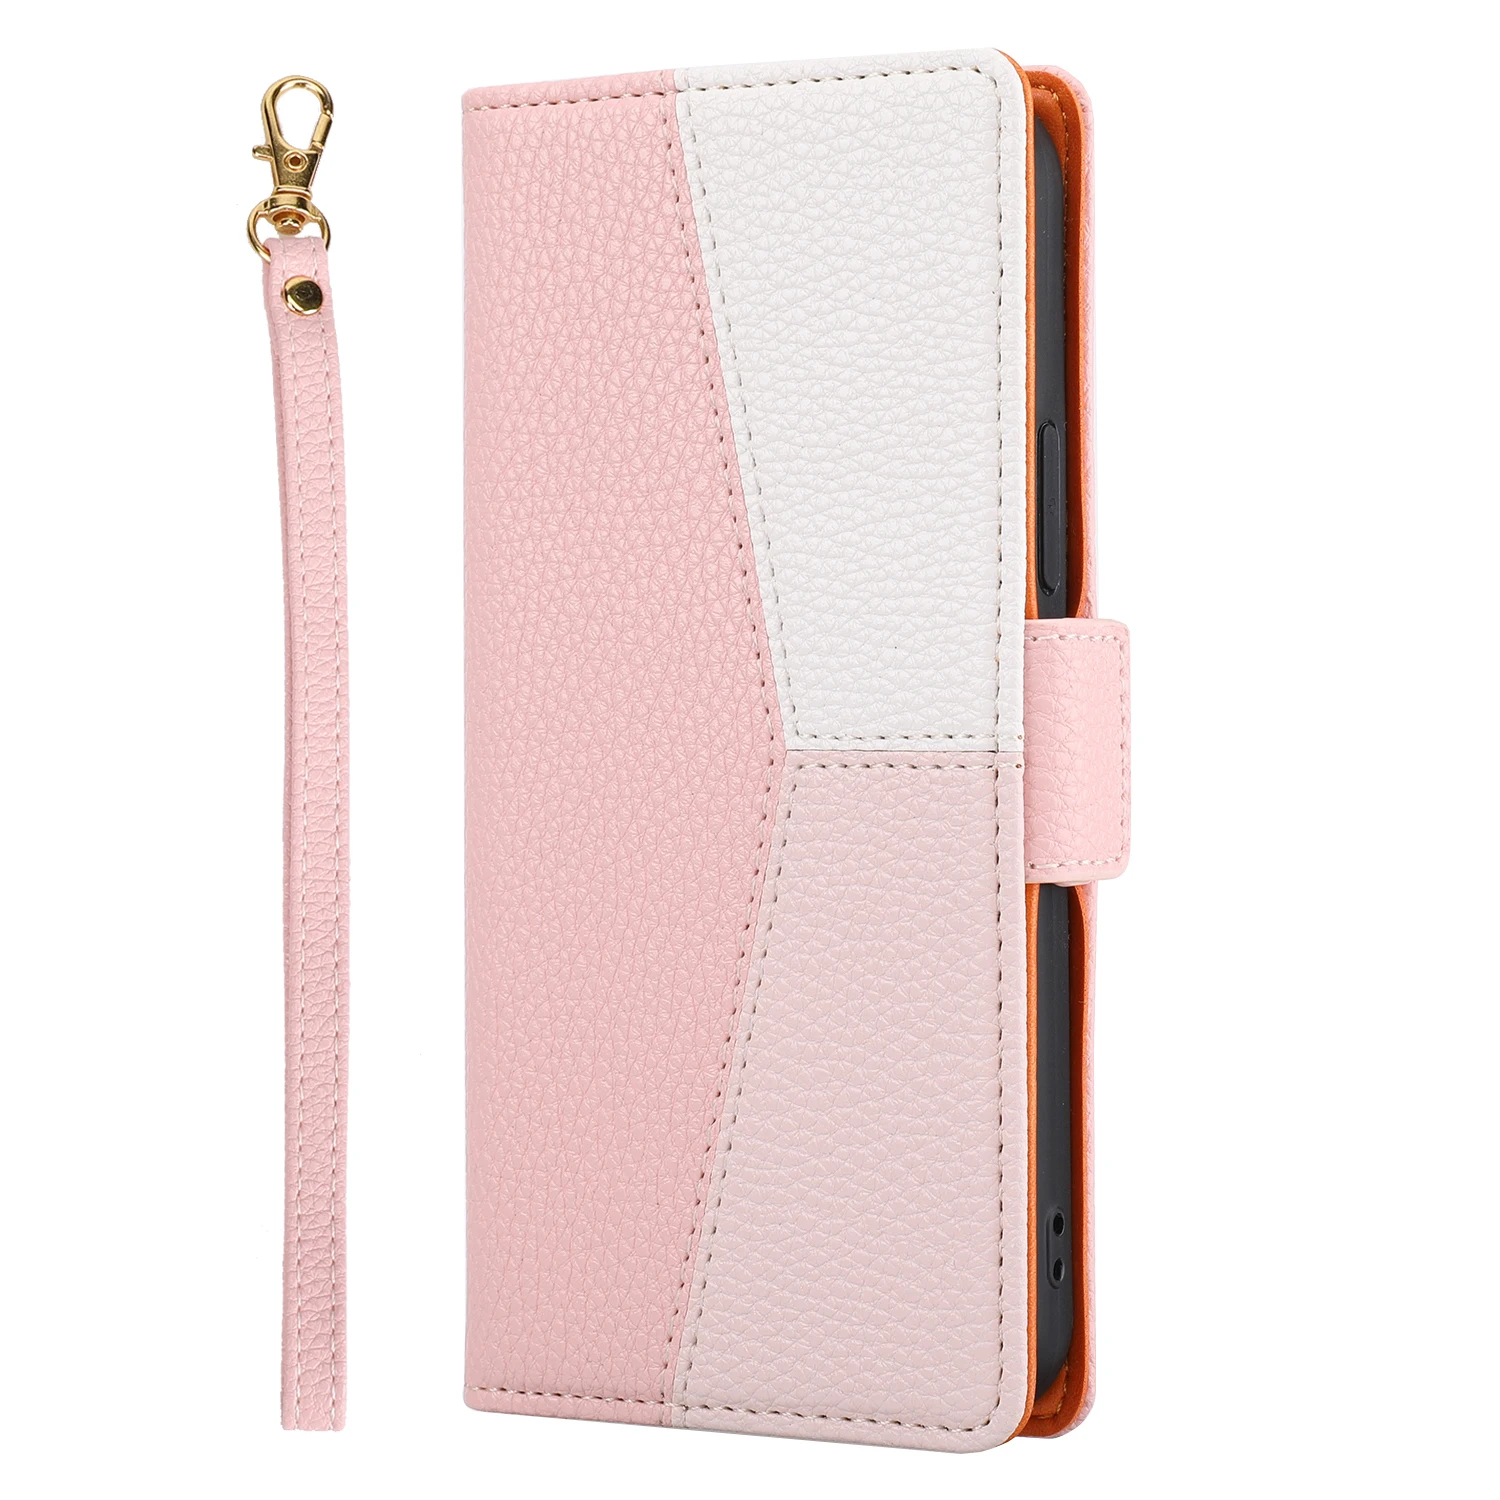 

Luxury Litchi Leather Wallet Case For Samsung Galaxy A12 A02S A22 A32 A42 A52 A72 A11 A31 A41 A51 A71 M30S M21 M31 M51 Cover